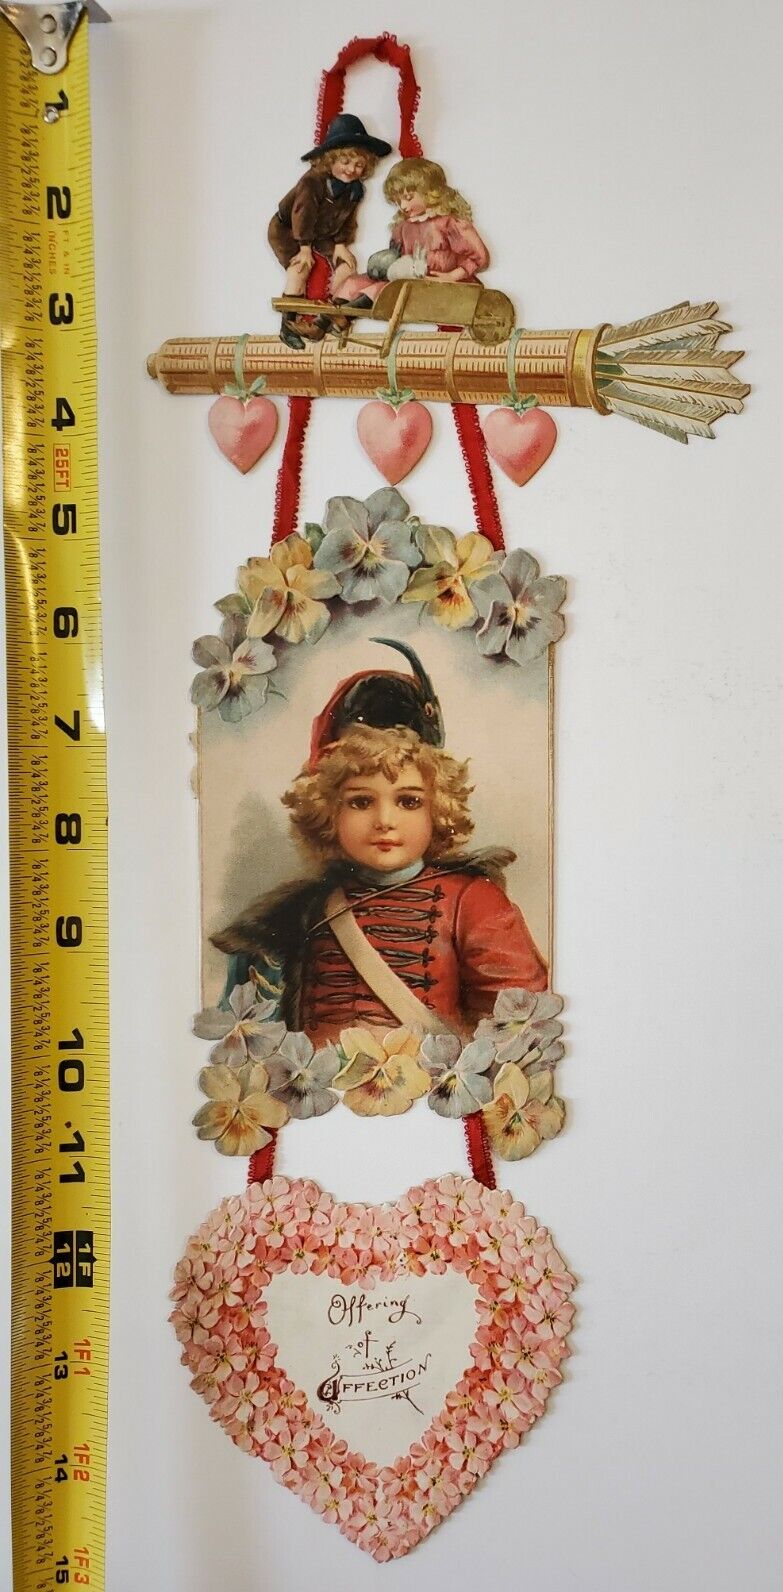 RARE Victorian Valentine Day Card Large Offering of Affection Cupid Arrow Sheath